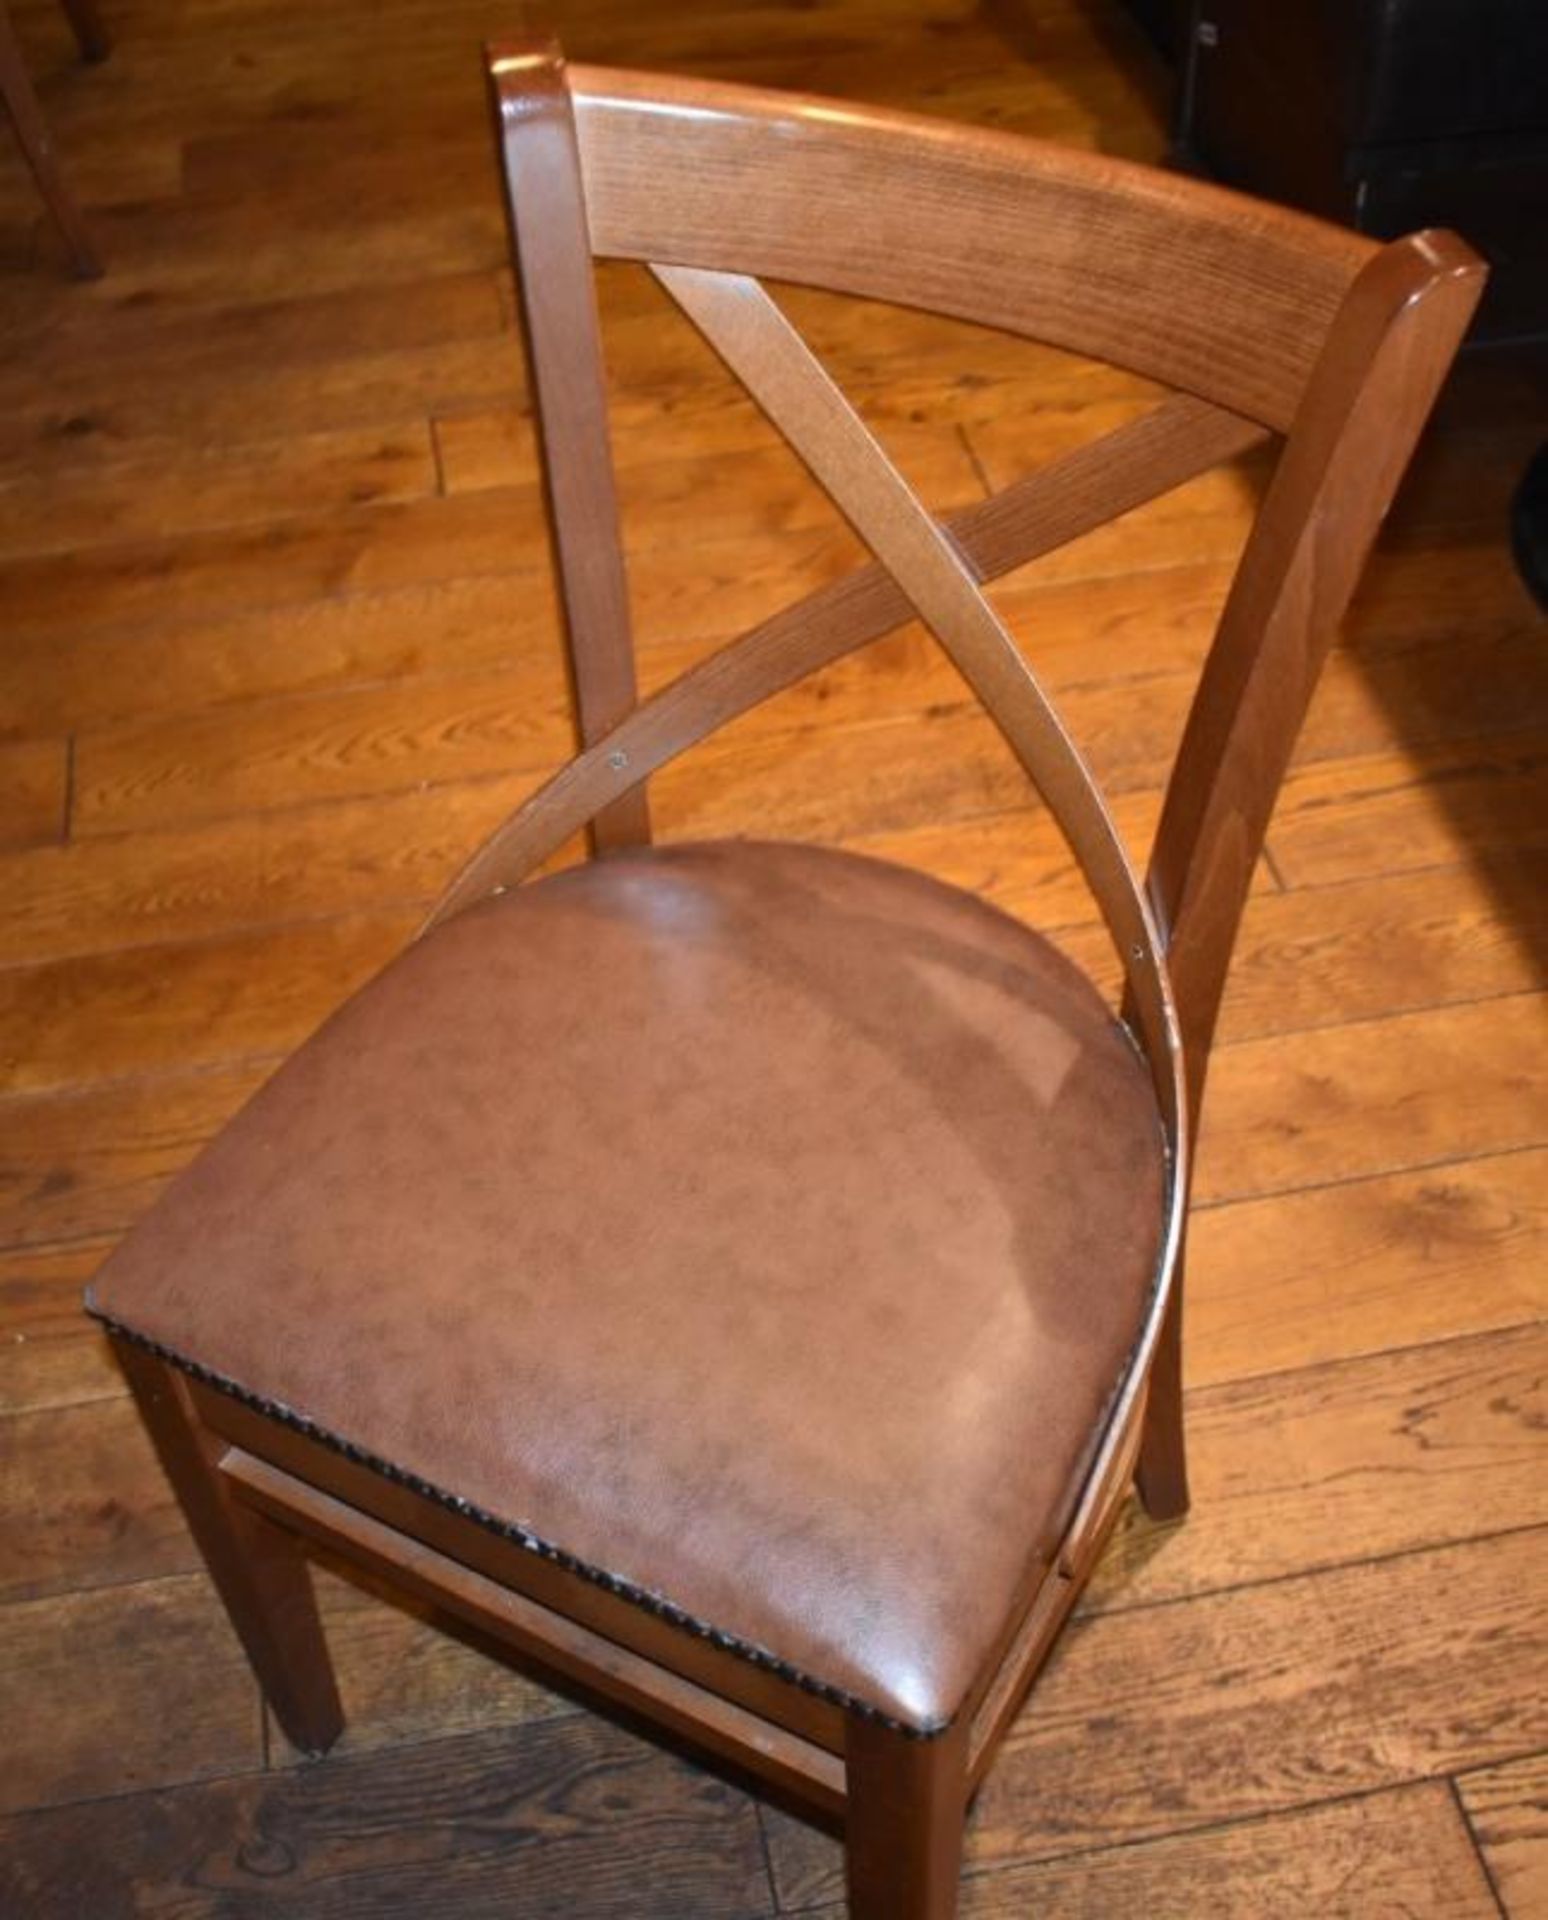 15 x Restaurant Dining Chairs With Wooden Crossbacks and Faux Leather Brown Seat Pads H84 x W45 cms - Image 3 of 4